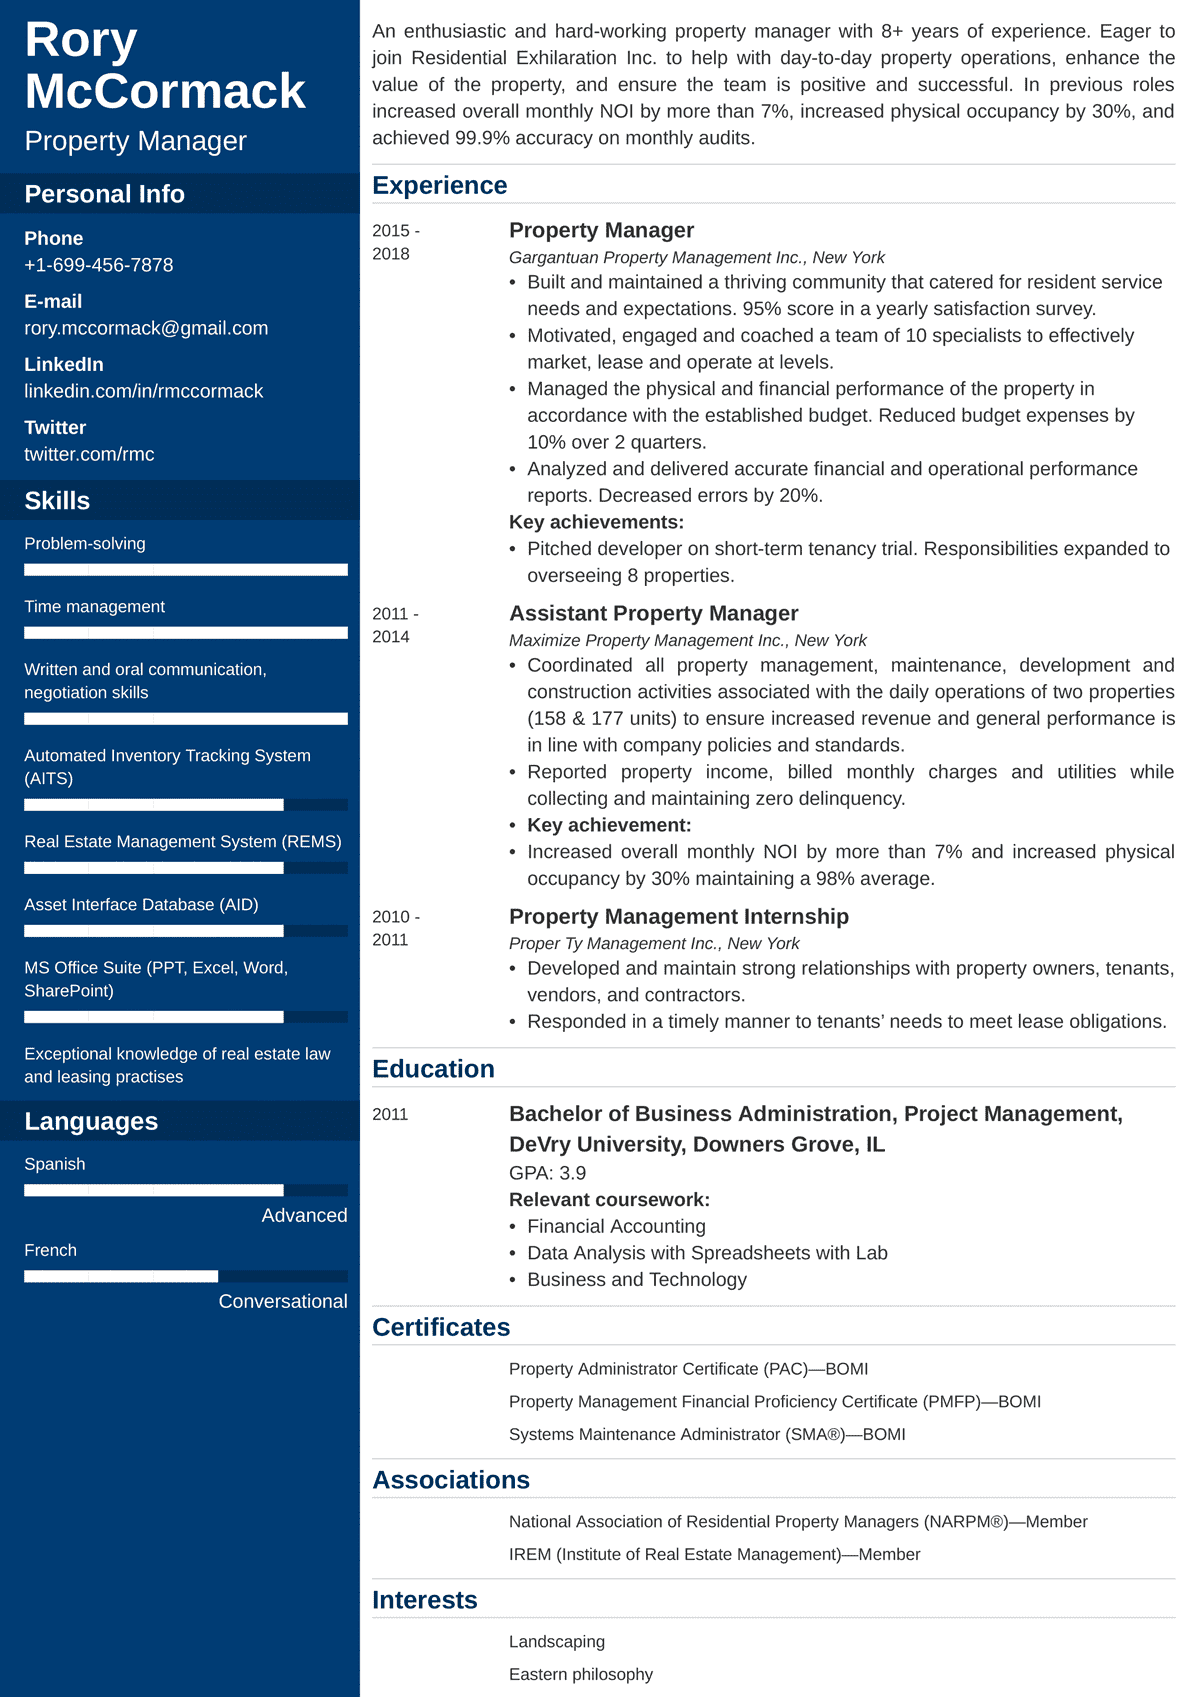 Property Manager CV Sample: 25+ Examples and Writing Tips